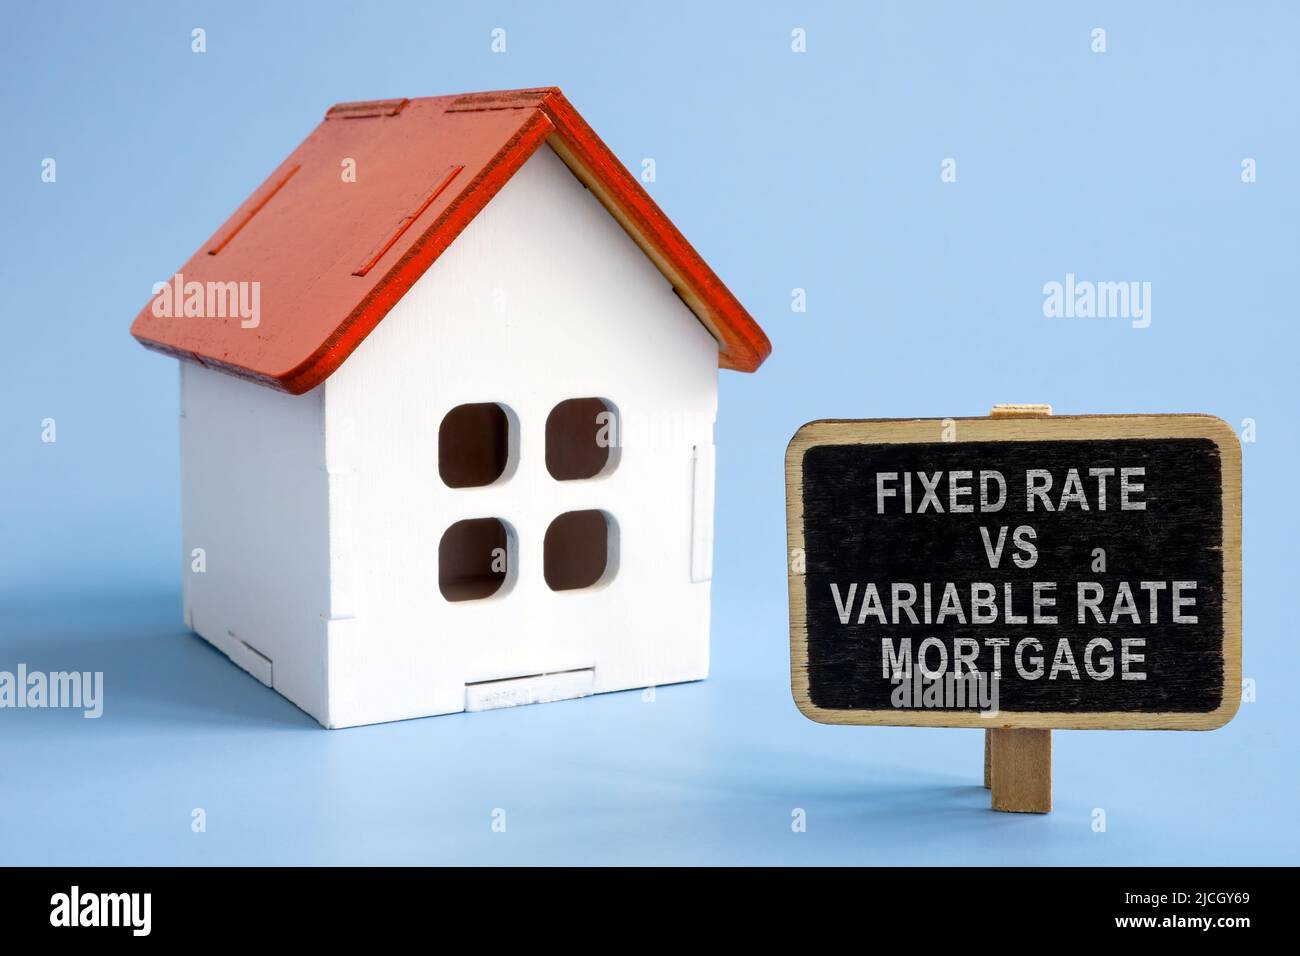 Fixed rate vs variable rate mortgage. Model of the house and a sign next to it. Stock Photo